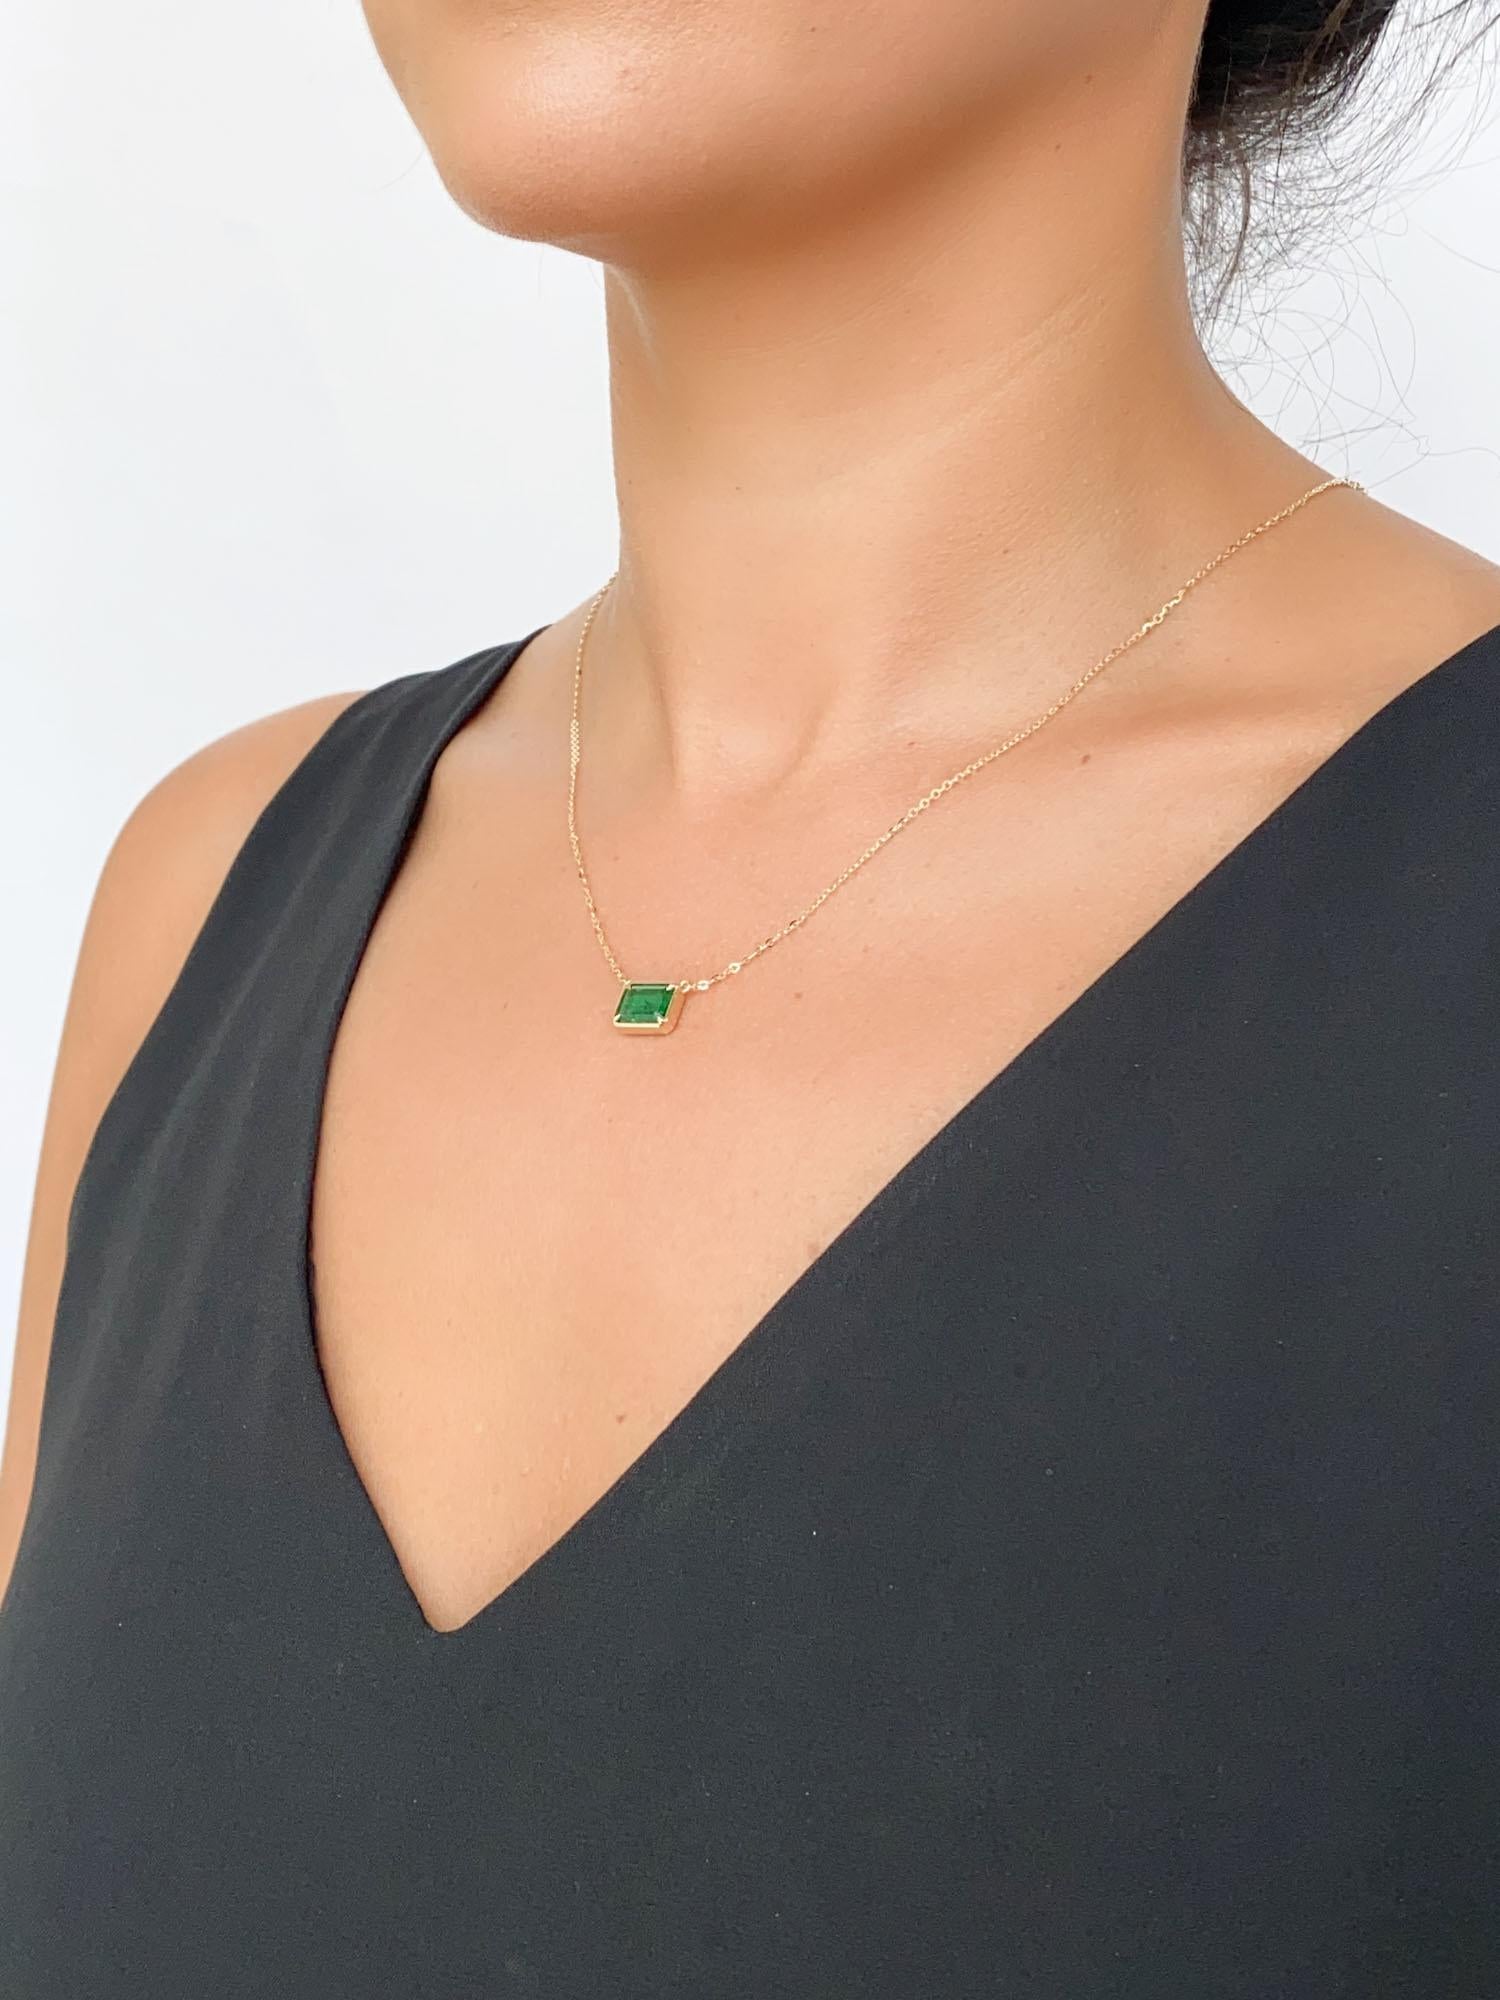 1.73ct Bright Green Zambian Emerald Necklace 14K Gold R4470 For Sale 4